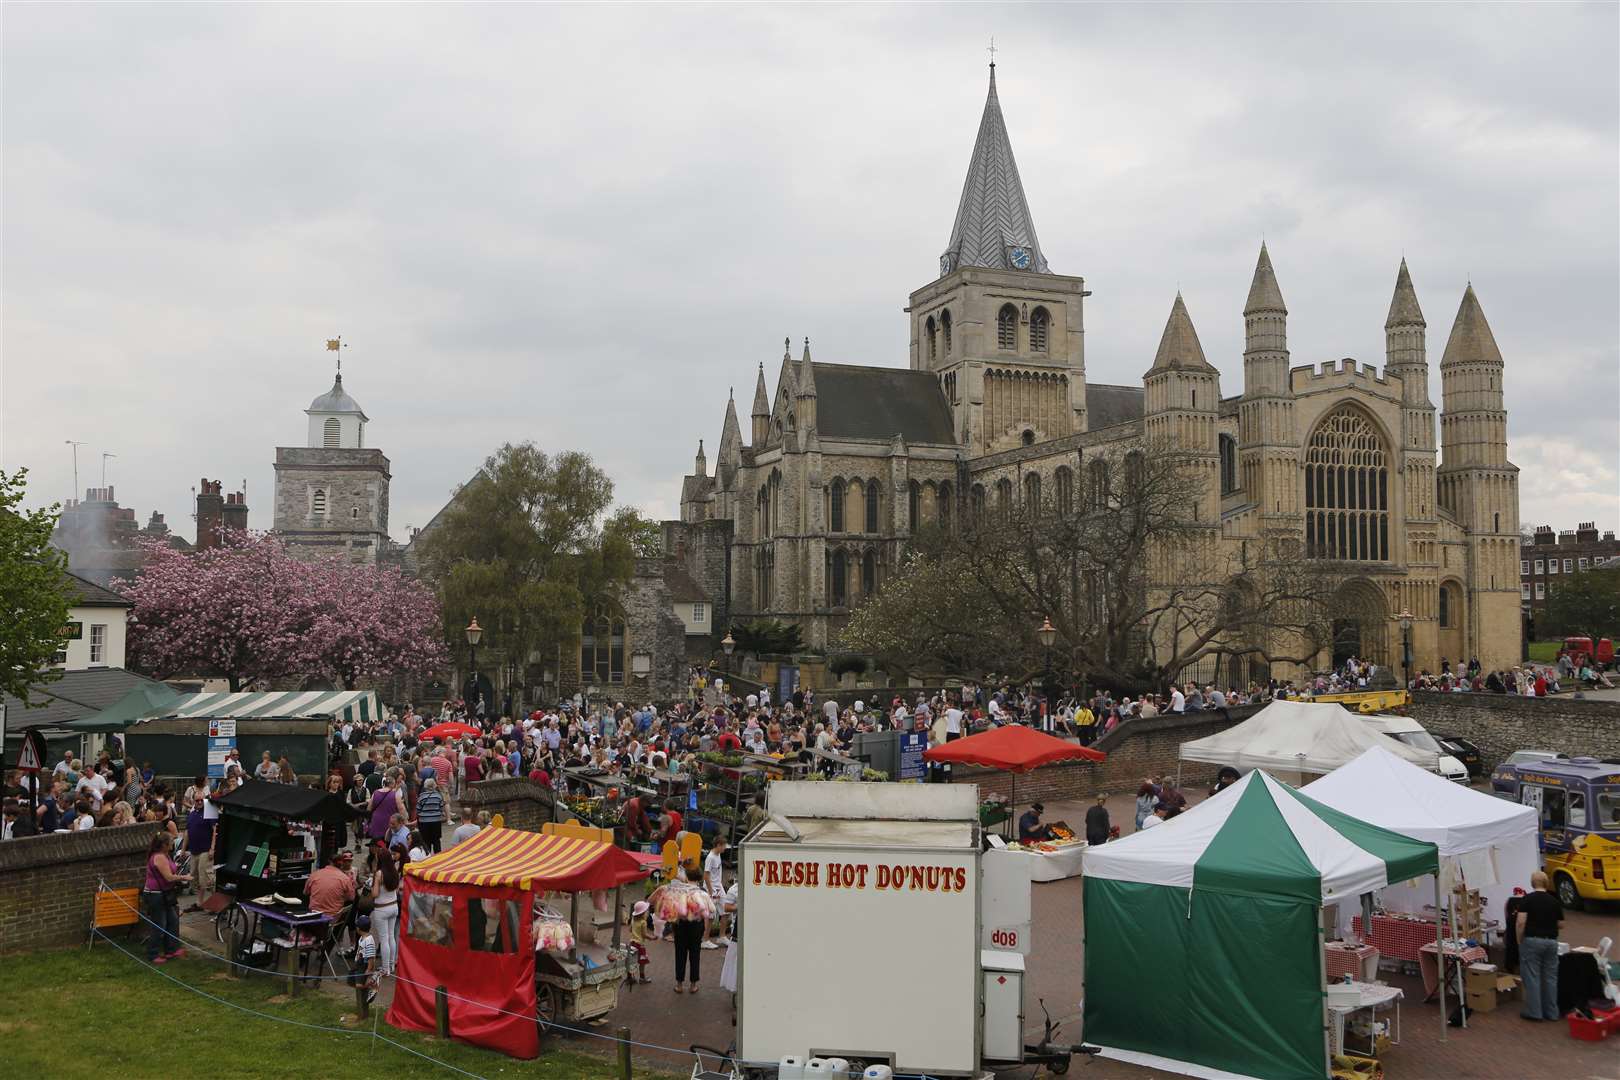 The Sweeps Festival attracts thousands of people every year. Picture by: Matthew Walker